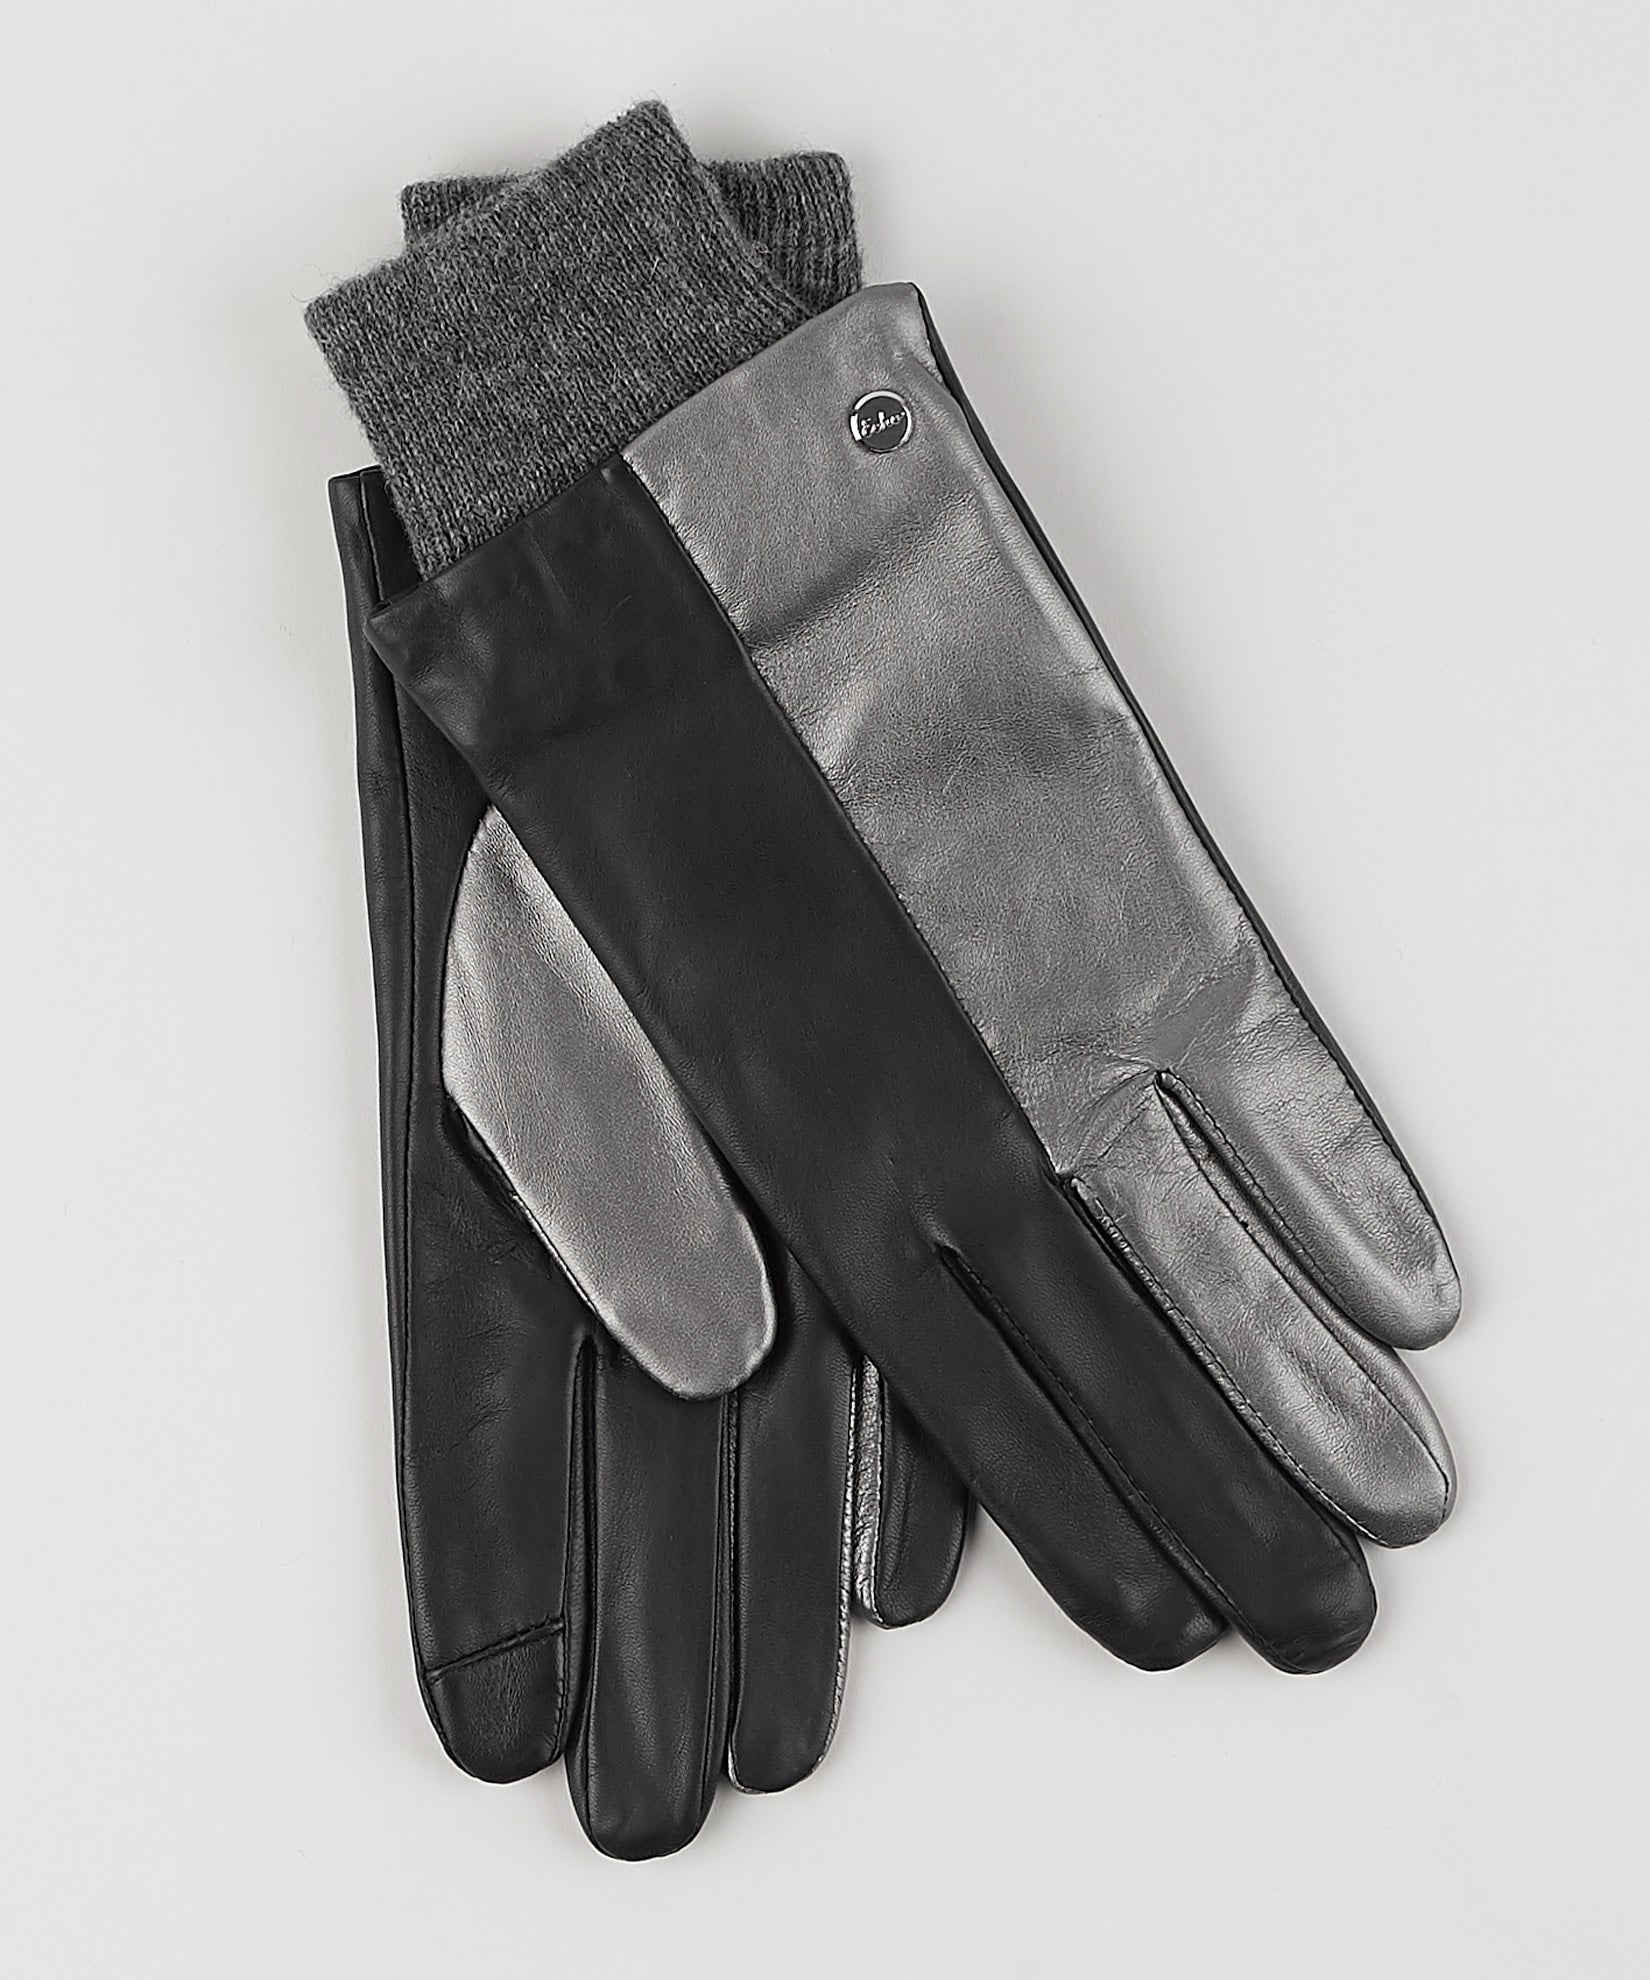 Leather Colorblock Glove in color Black